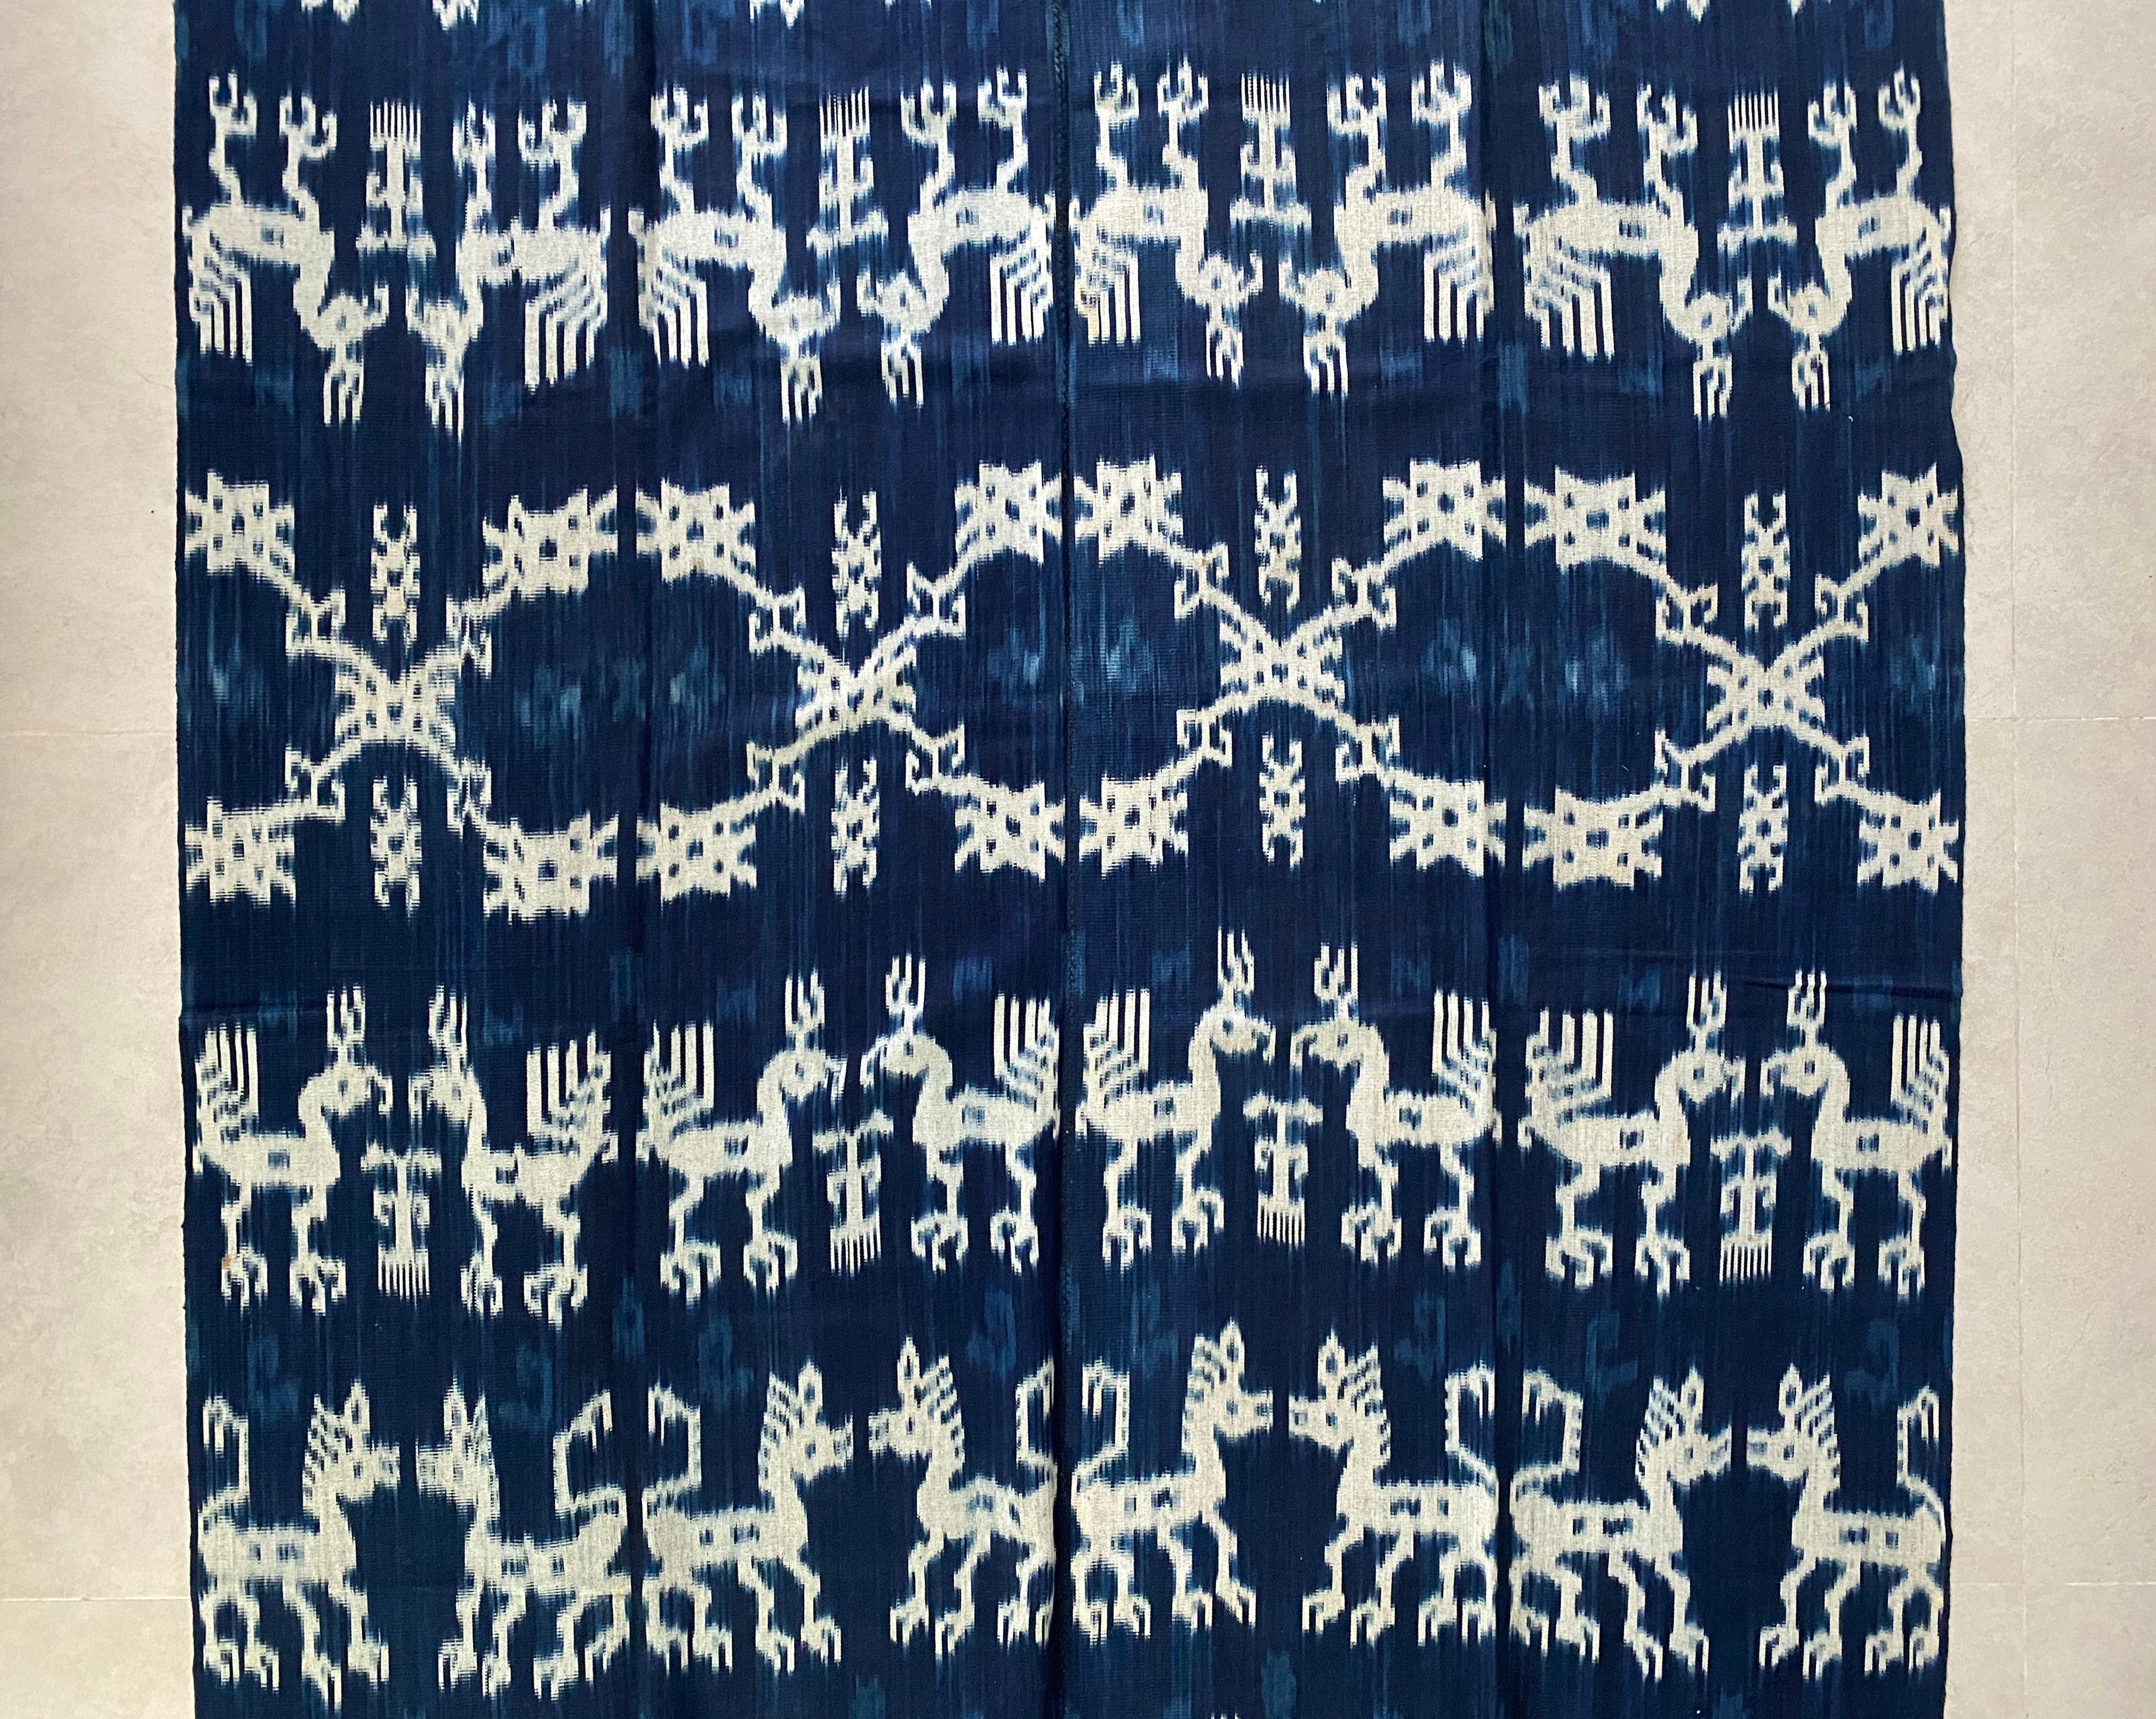 This Ikat textile originates from the Island of Sumba, Indonesia. It is hand-woven using naturally dyed yarns via a method passed on through generations. It features a predominantly dark blue background with chicken motifs and distinct tribal